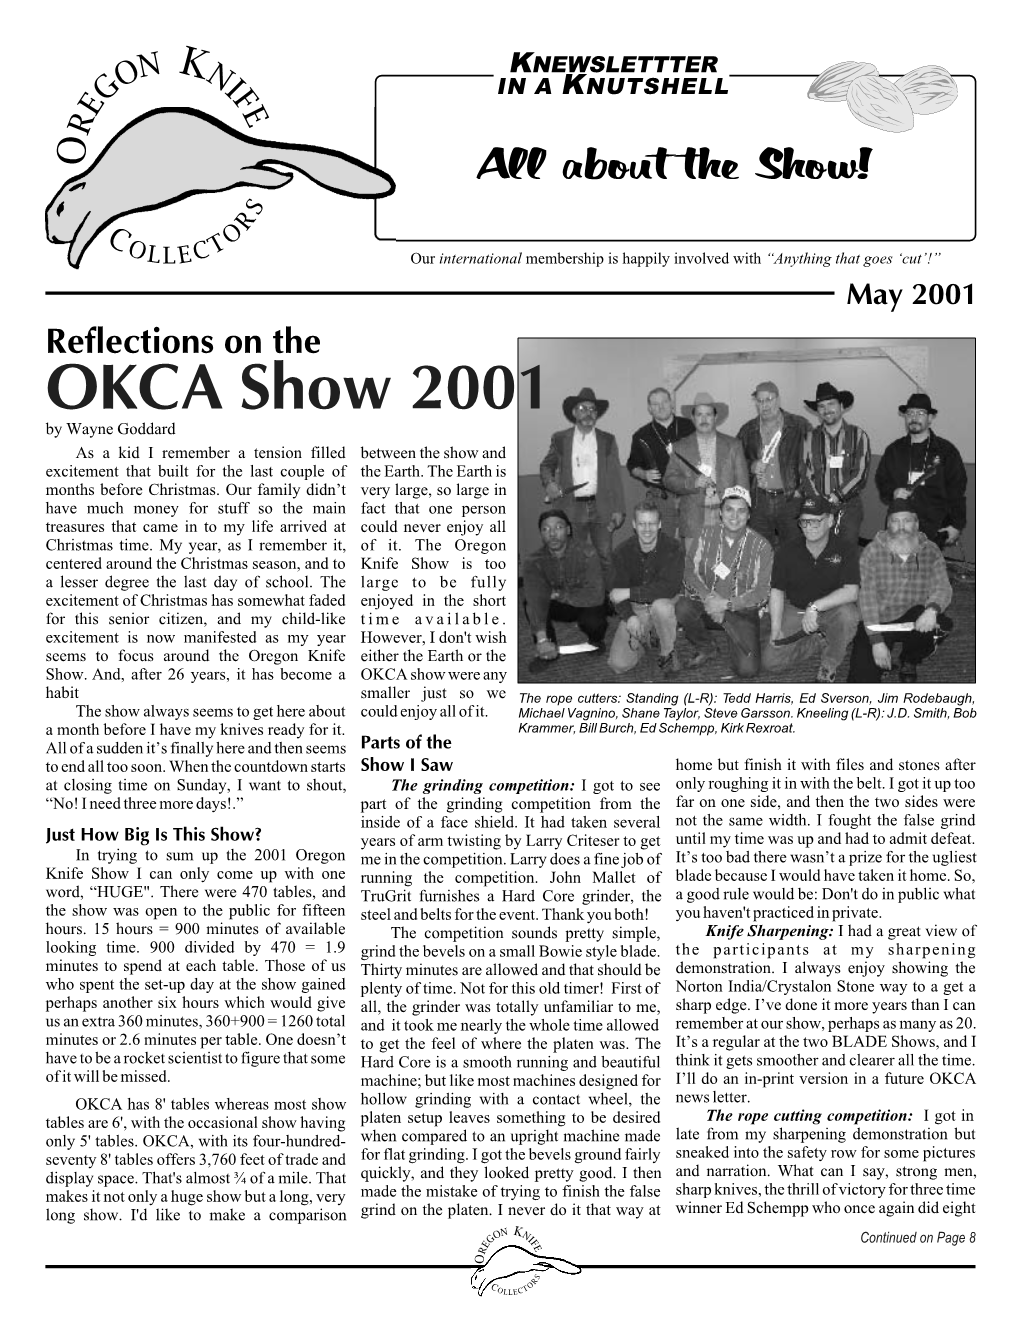 OKCA Show 2001 by Wayne Goddard As a Kid I Remember a Tension Filled Between the Show and Excitement That Built for the Last Couple of the Earth